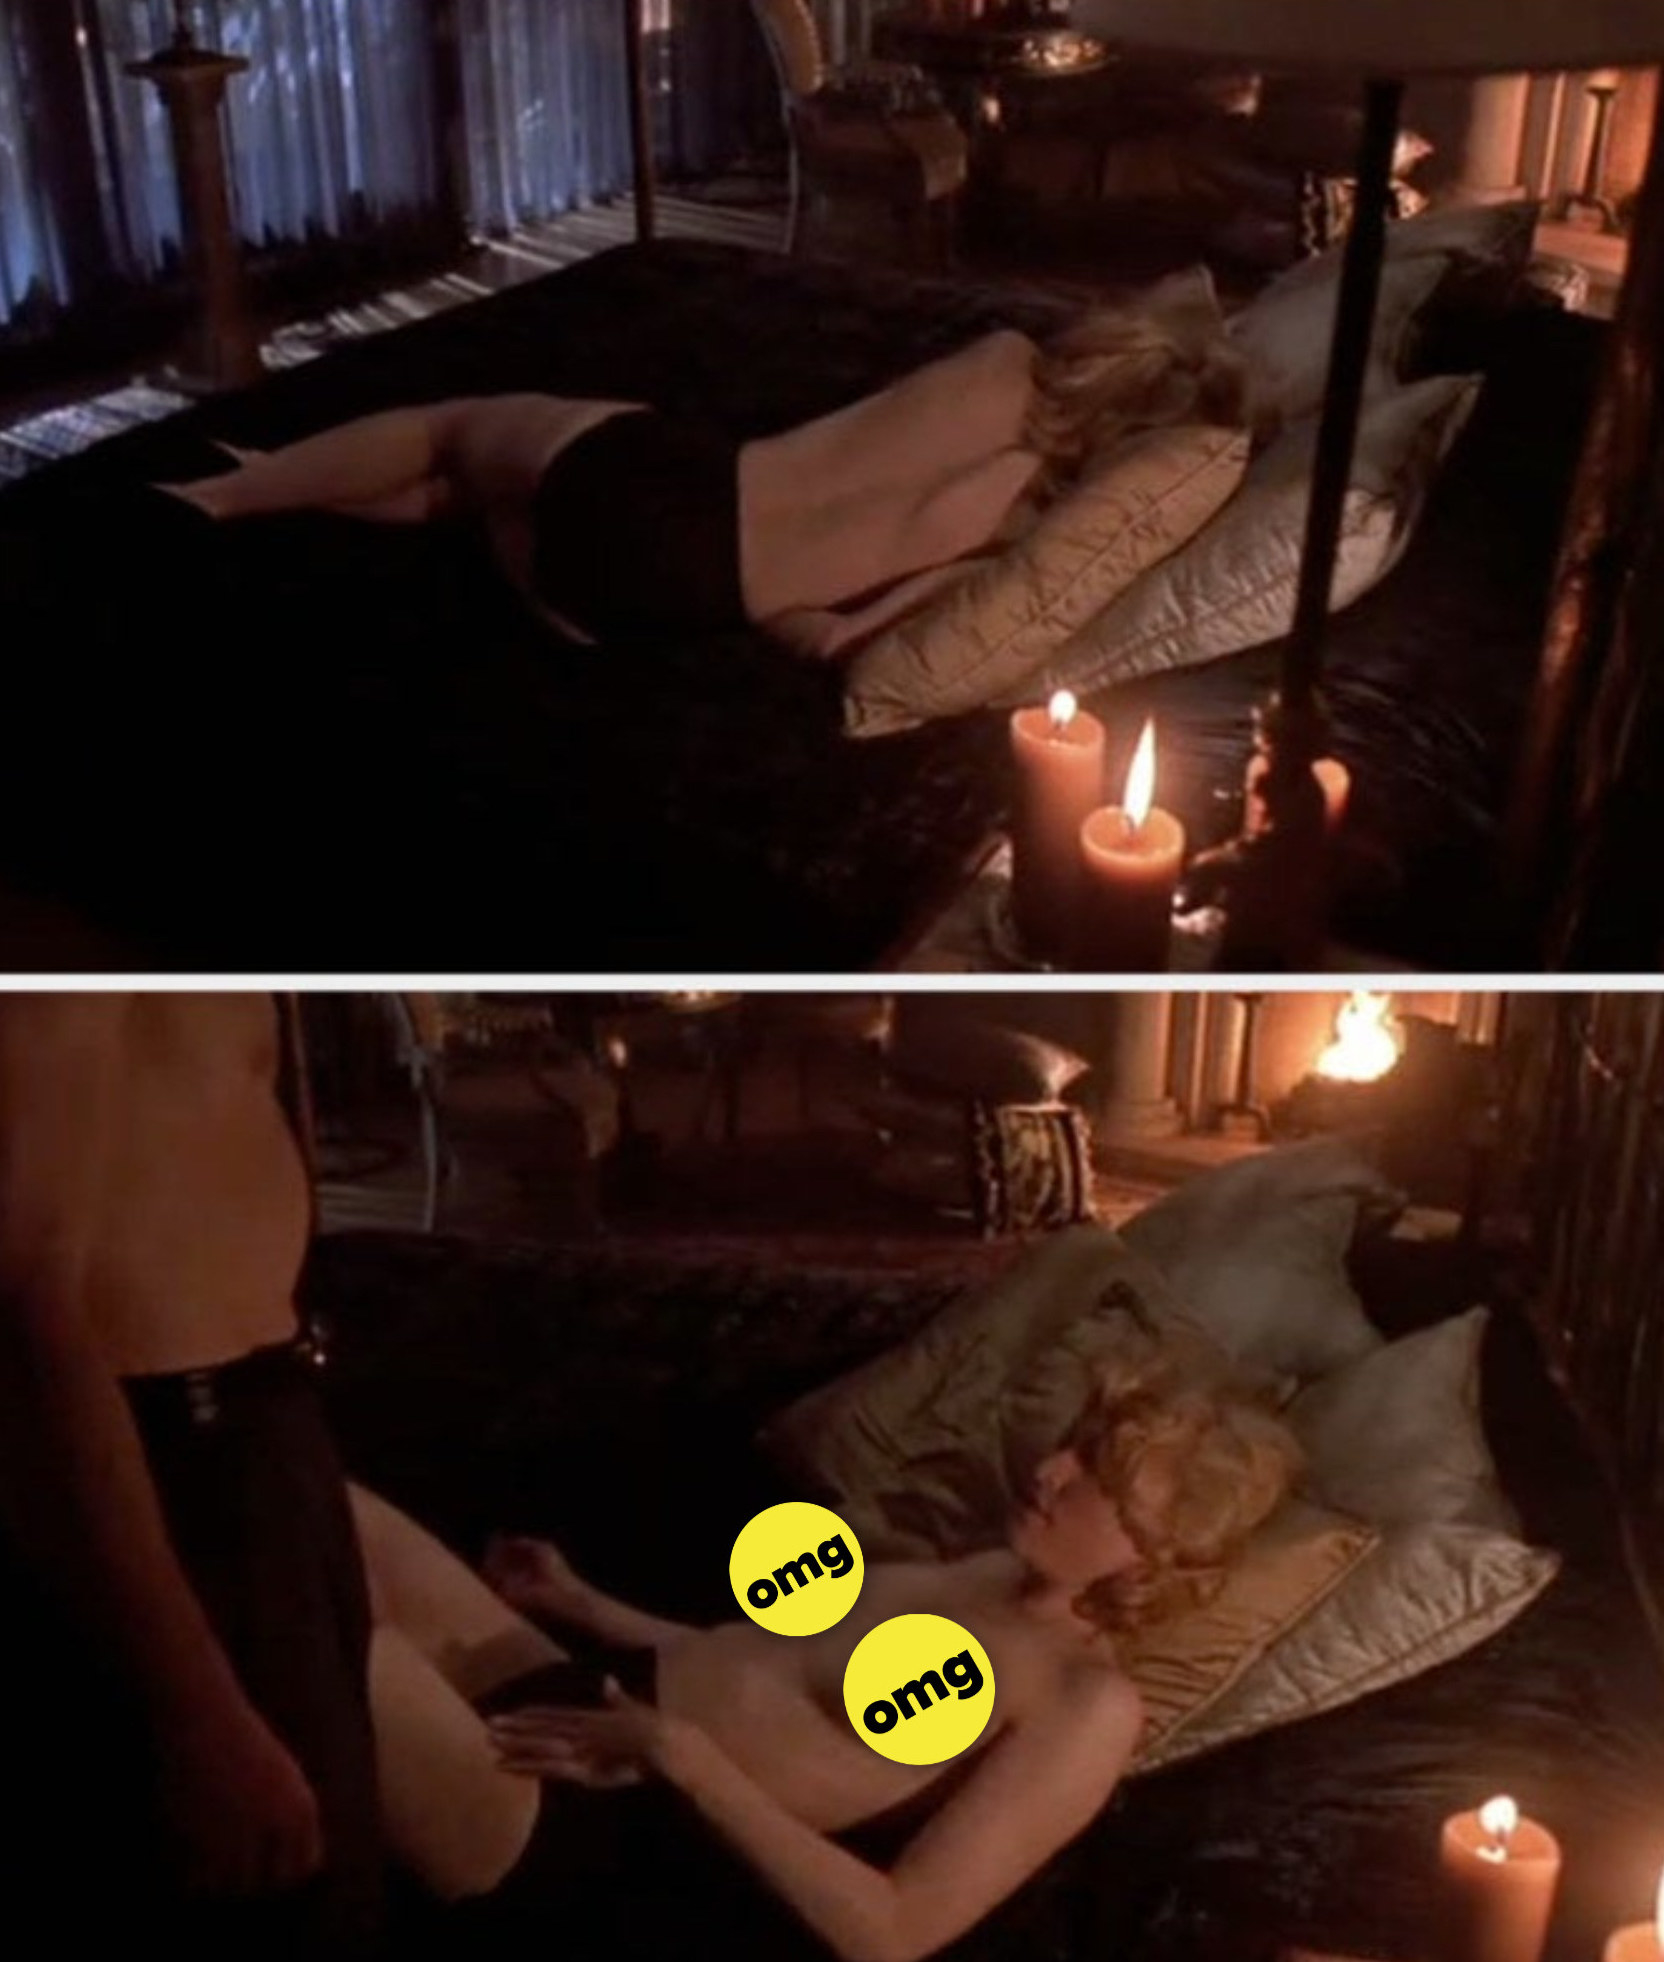 Rebecca and Frank having sex by candlelight in &quot;Body of Evidence&quot;